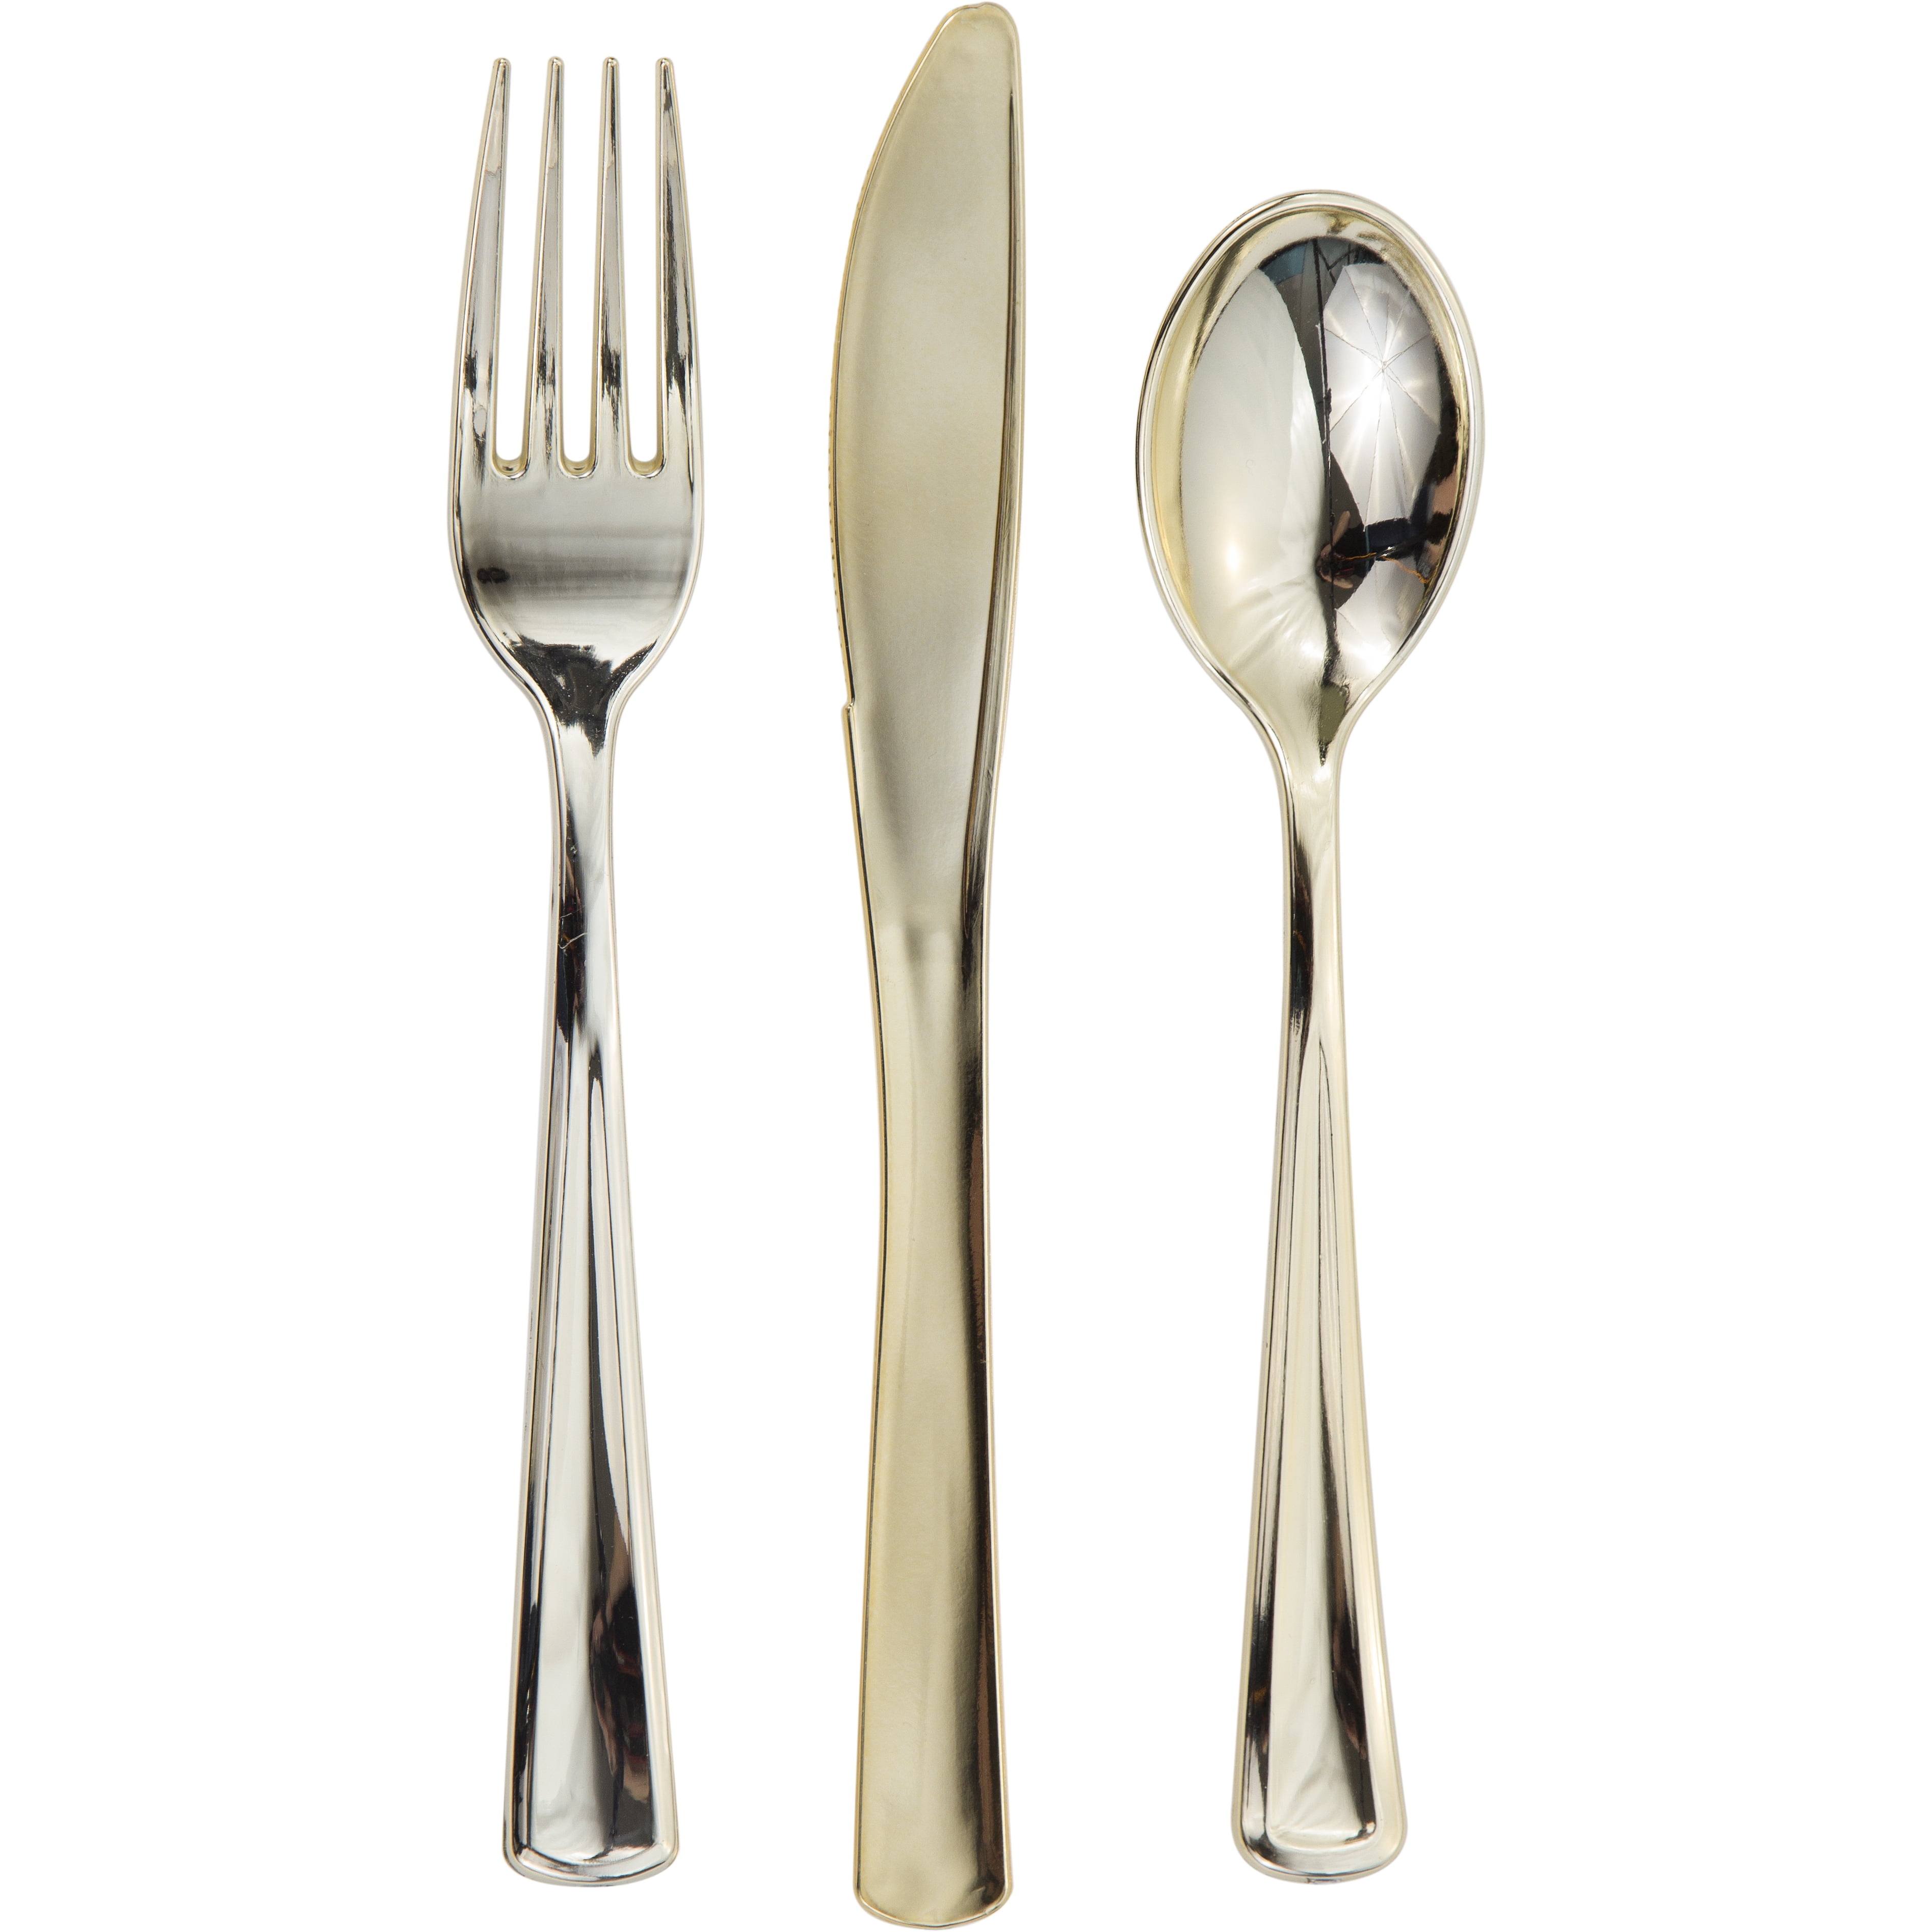 16 Piece Cutlery Set Stainless Steel & Plastic handles Gold..Silver 